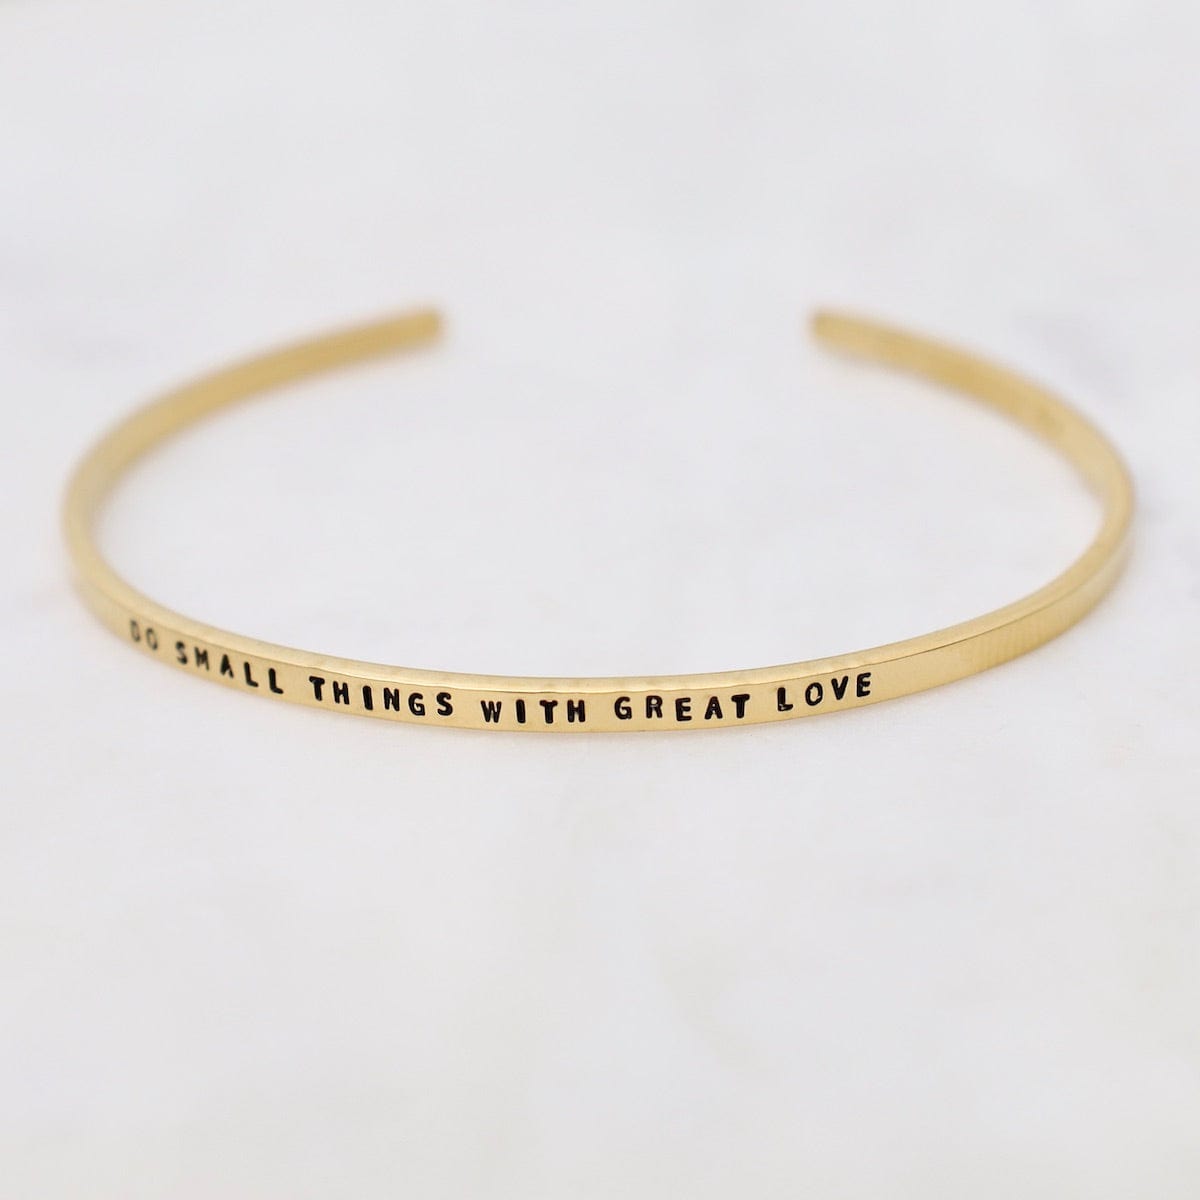 BRC-GPL Do Small Things with Great Love Stamped Gold Plated Cuff Bracelet